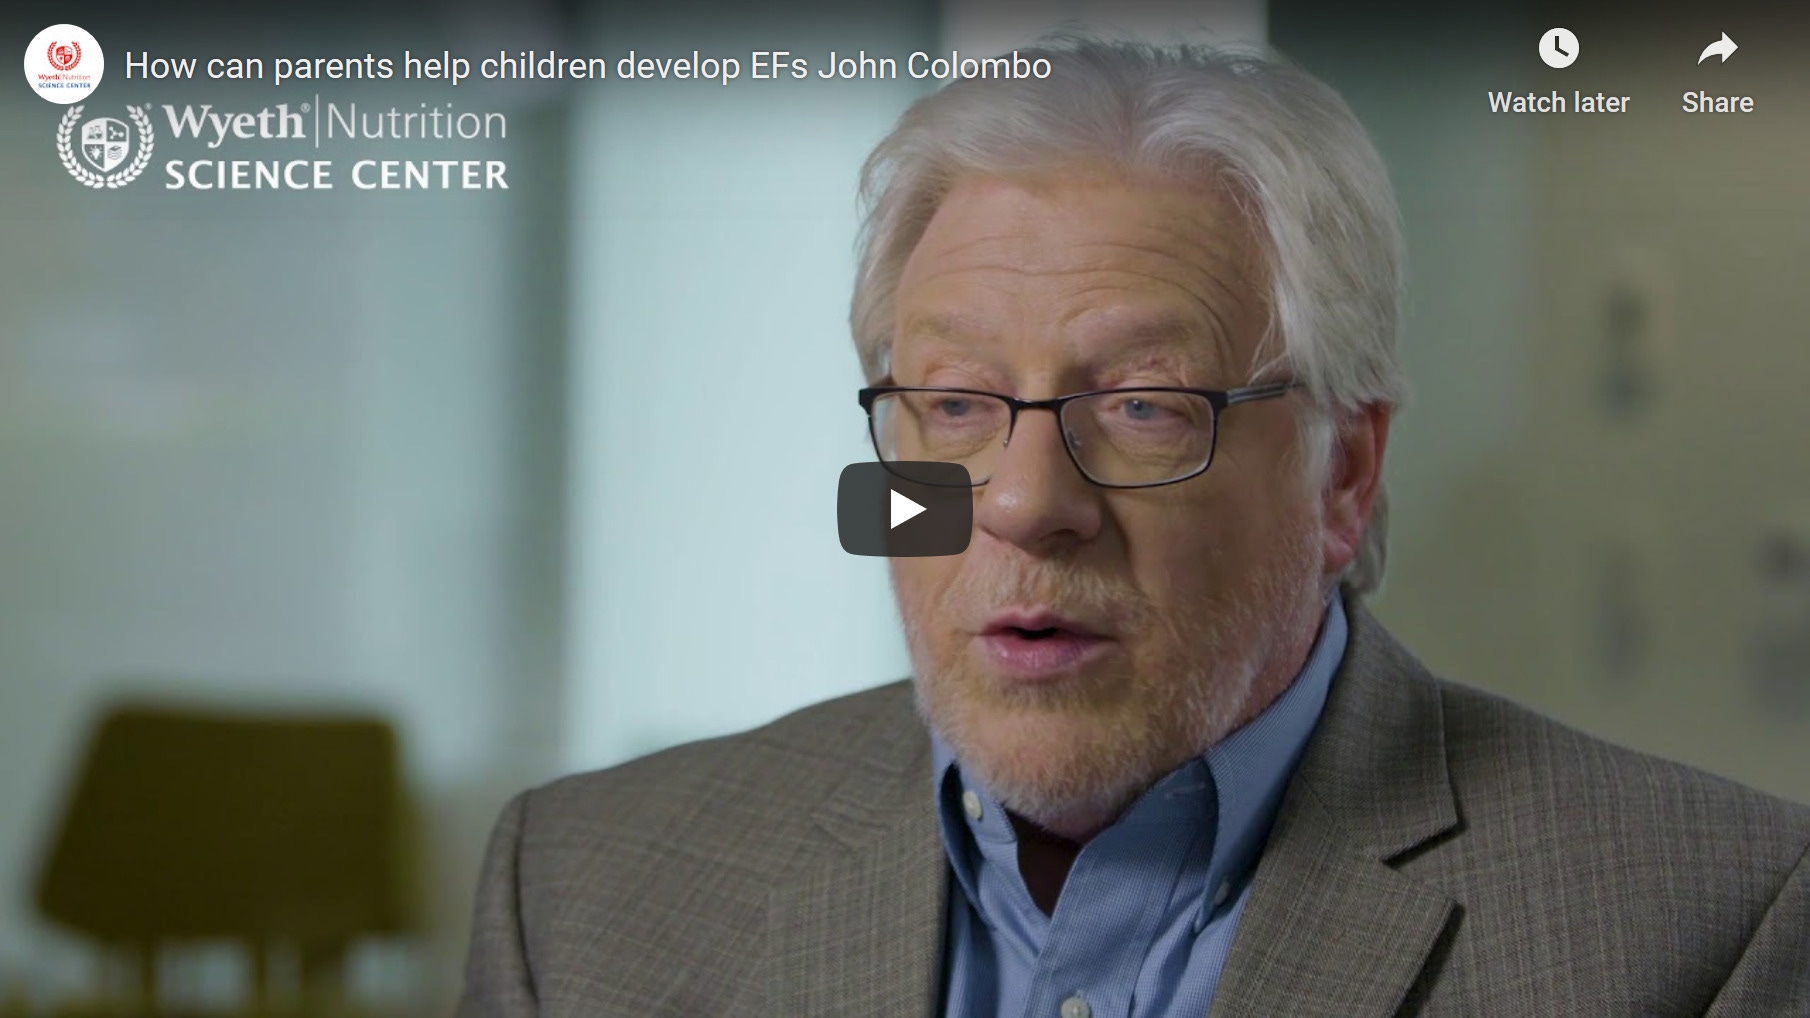 How can parents help children develop Executive Functions - Prof. John Colombo